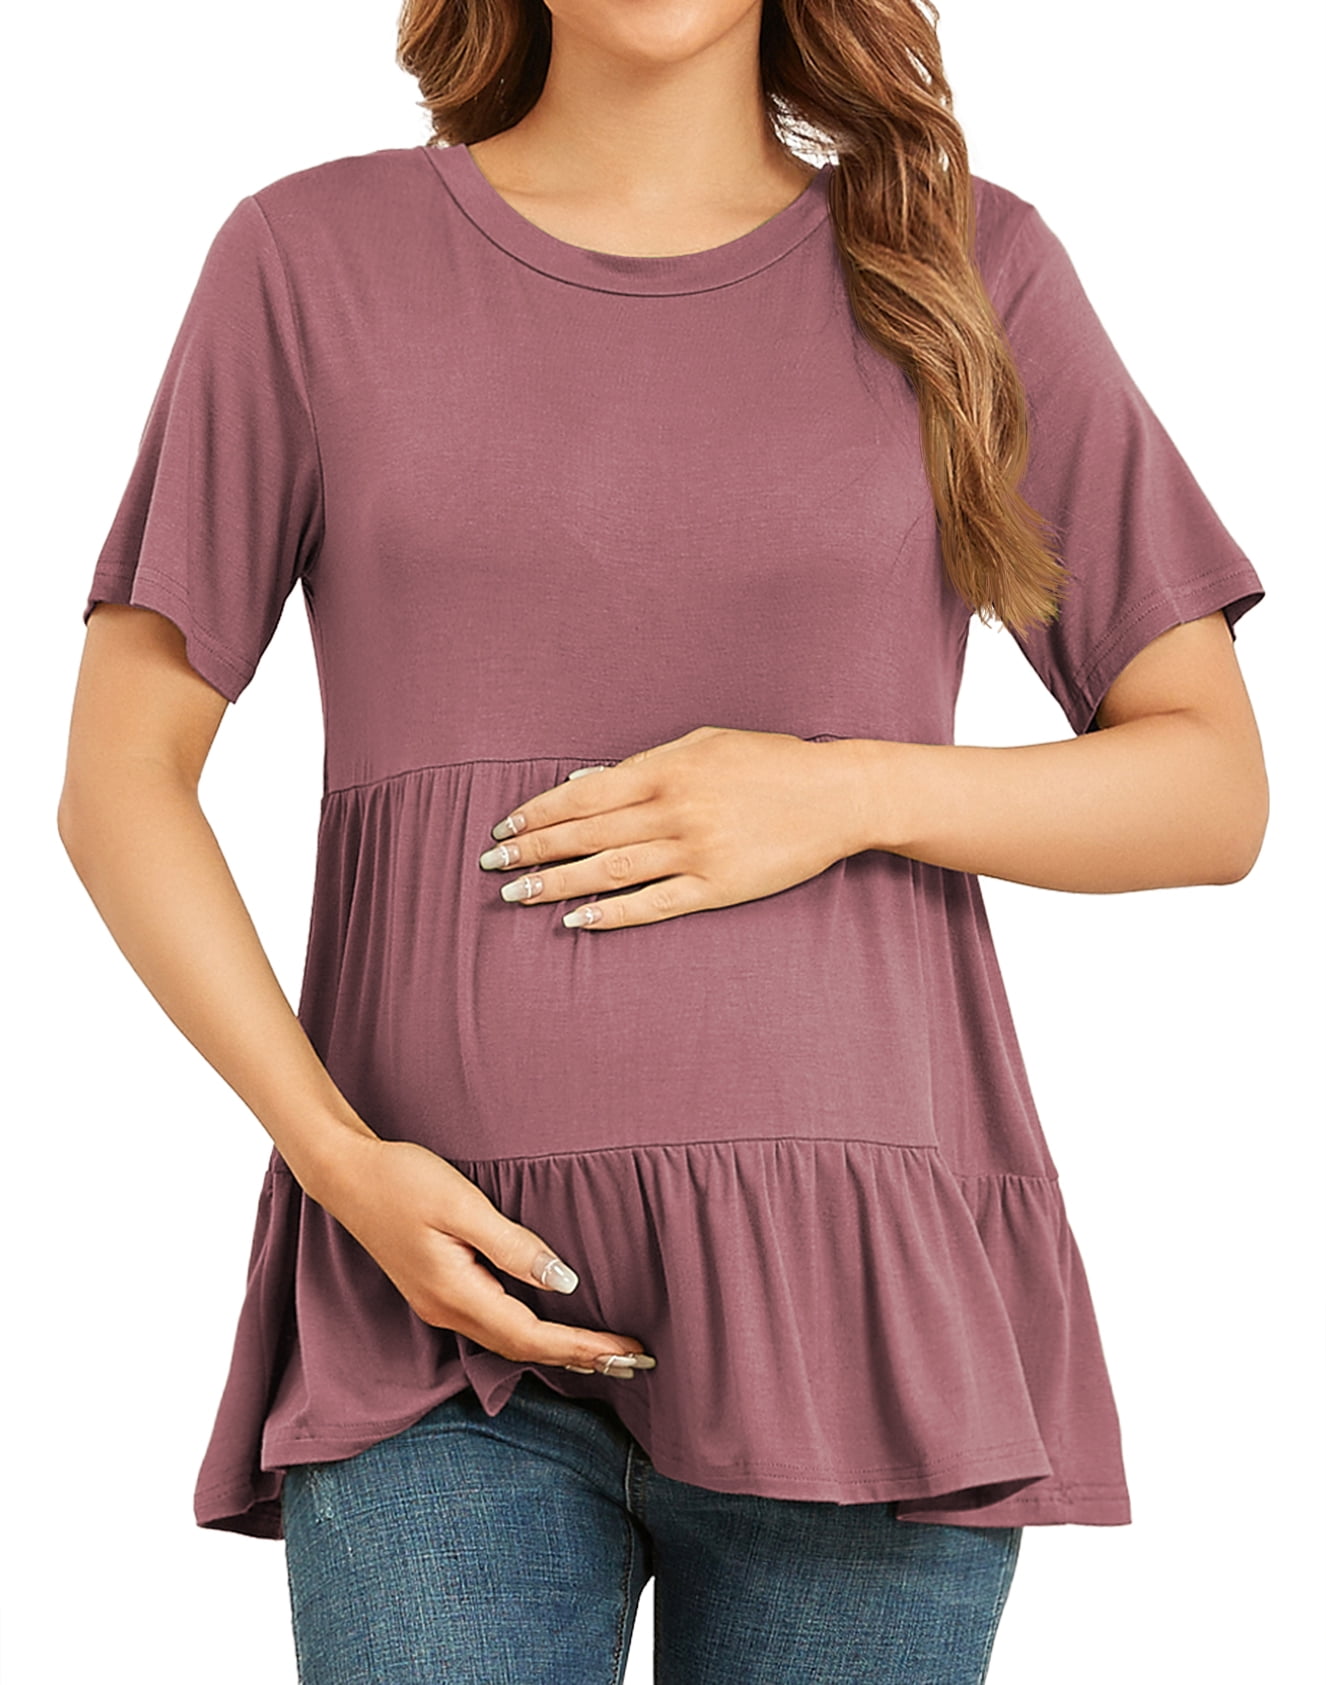 Xpenyo Women's Maternity Tunic Shirts Floral Tops Lace Bell Sleeve Pregnancy Shirt Tee